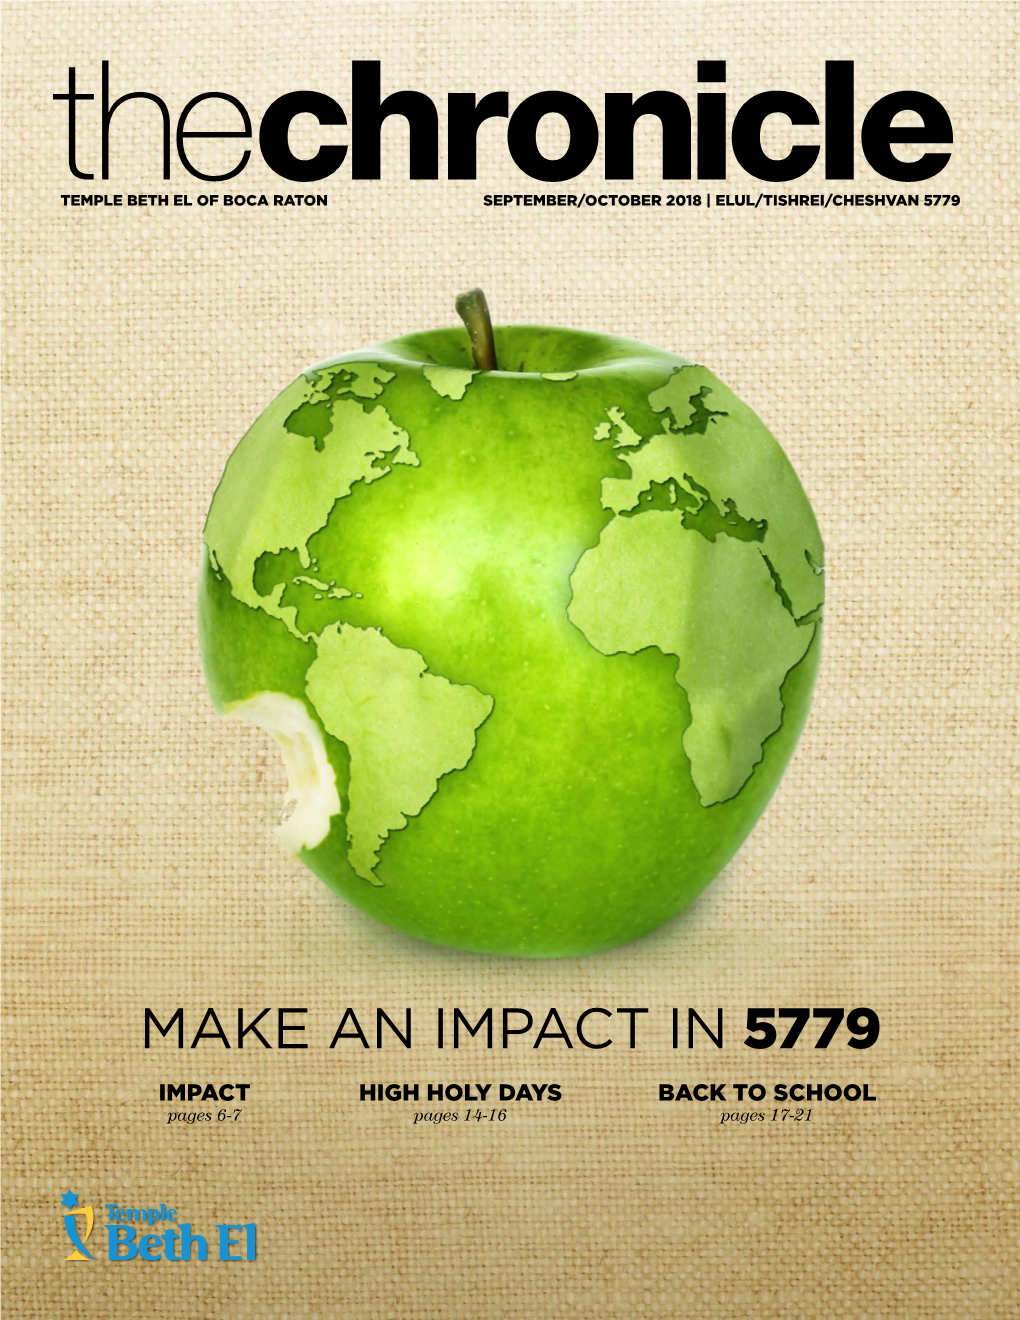 MAKE an IMPACT in 5779 IMPACT HIGH HOLY DAYS BACK to SCHOOL Pages 6-7 Pages 14-16 Pages 17-21